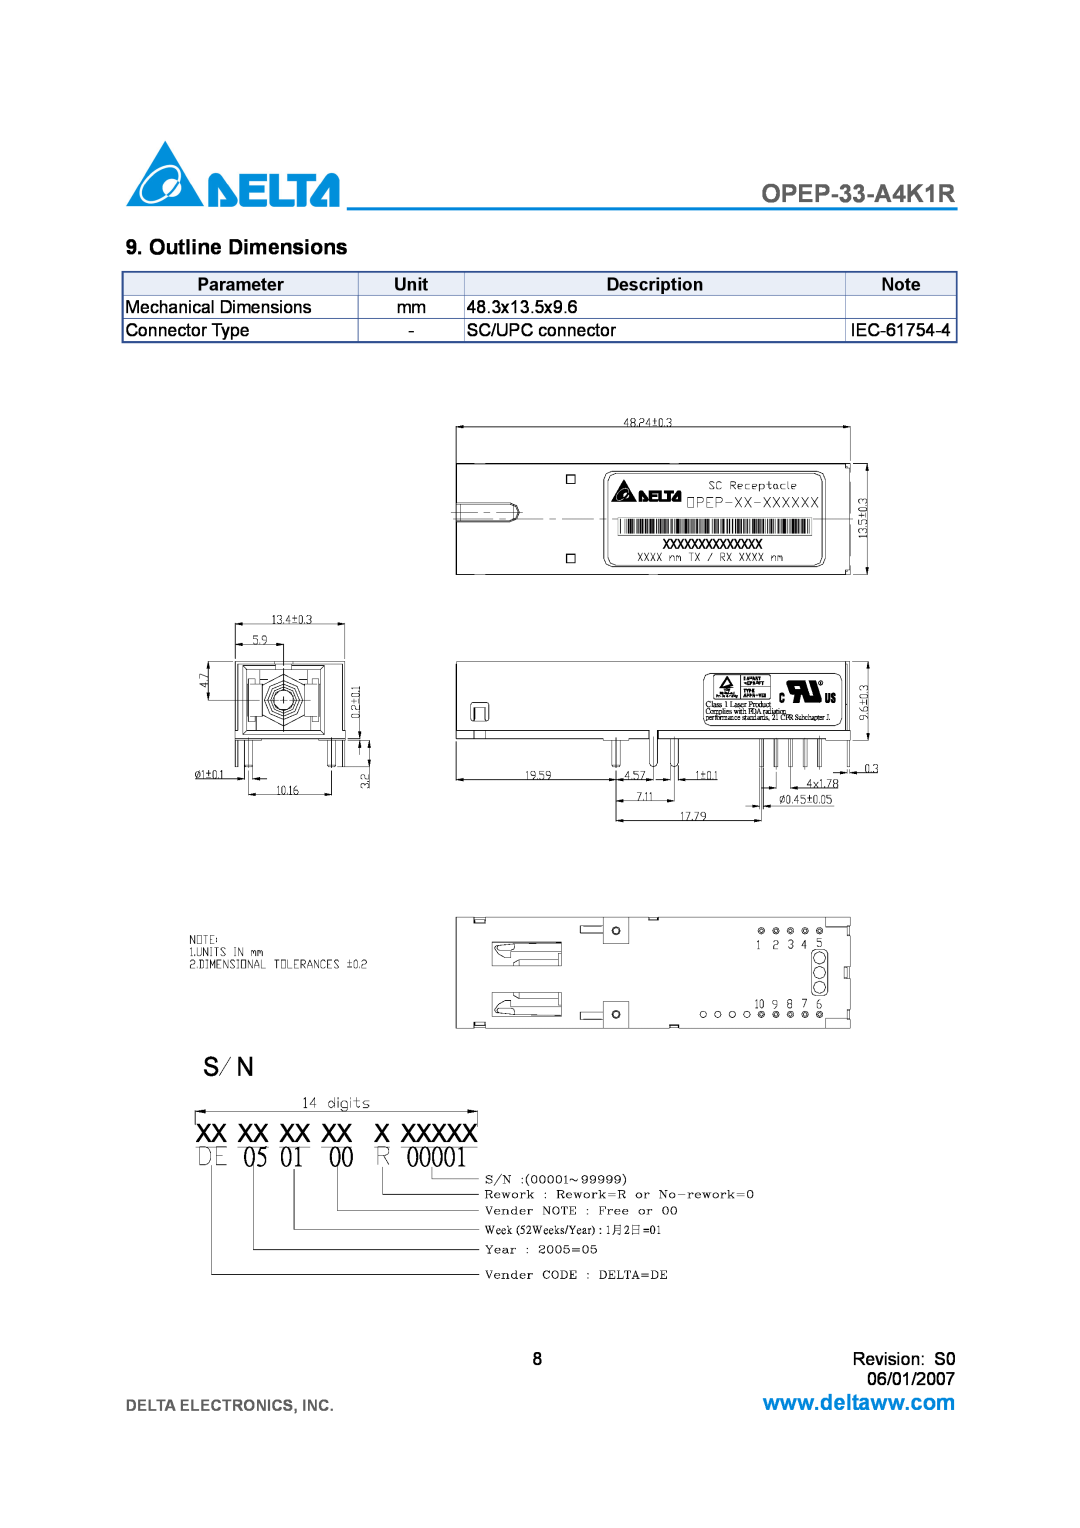 Delta Electronics OPEP-33-A4K1R manual Outline Dimensions, Delta Electronics, Inc, W eek 52W eeks/Year 1月 2日 =01 